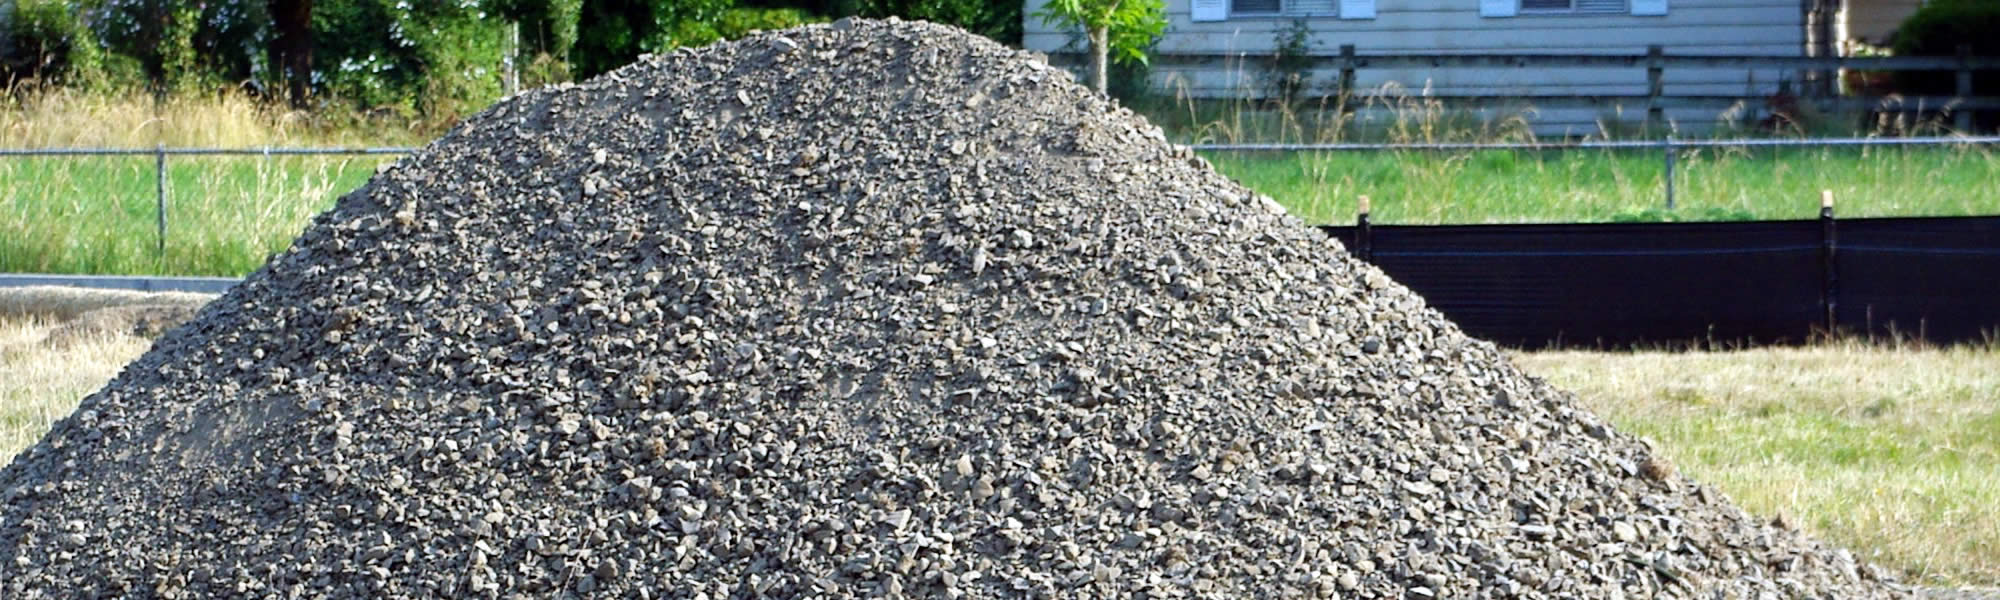 Bellevue Gravel and Dirt Delivery Services near me